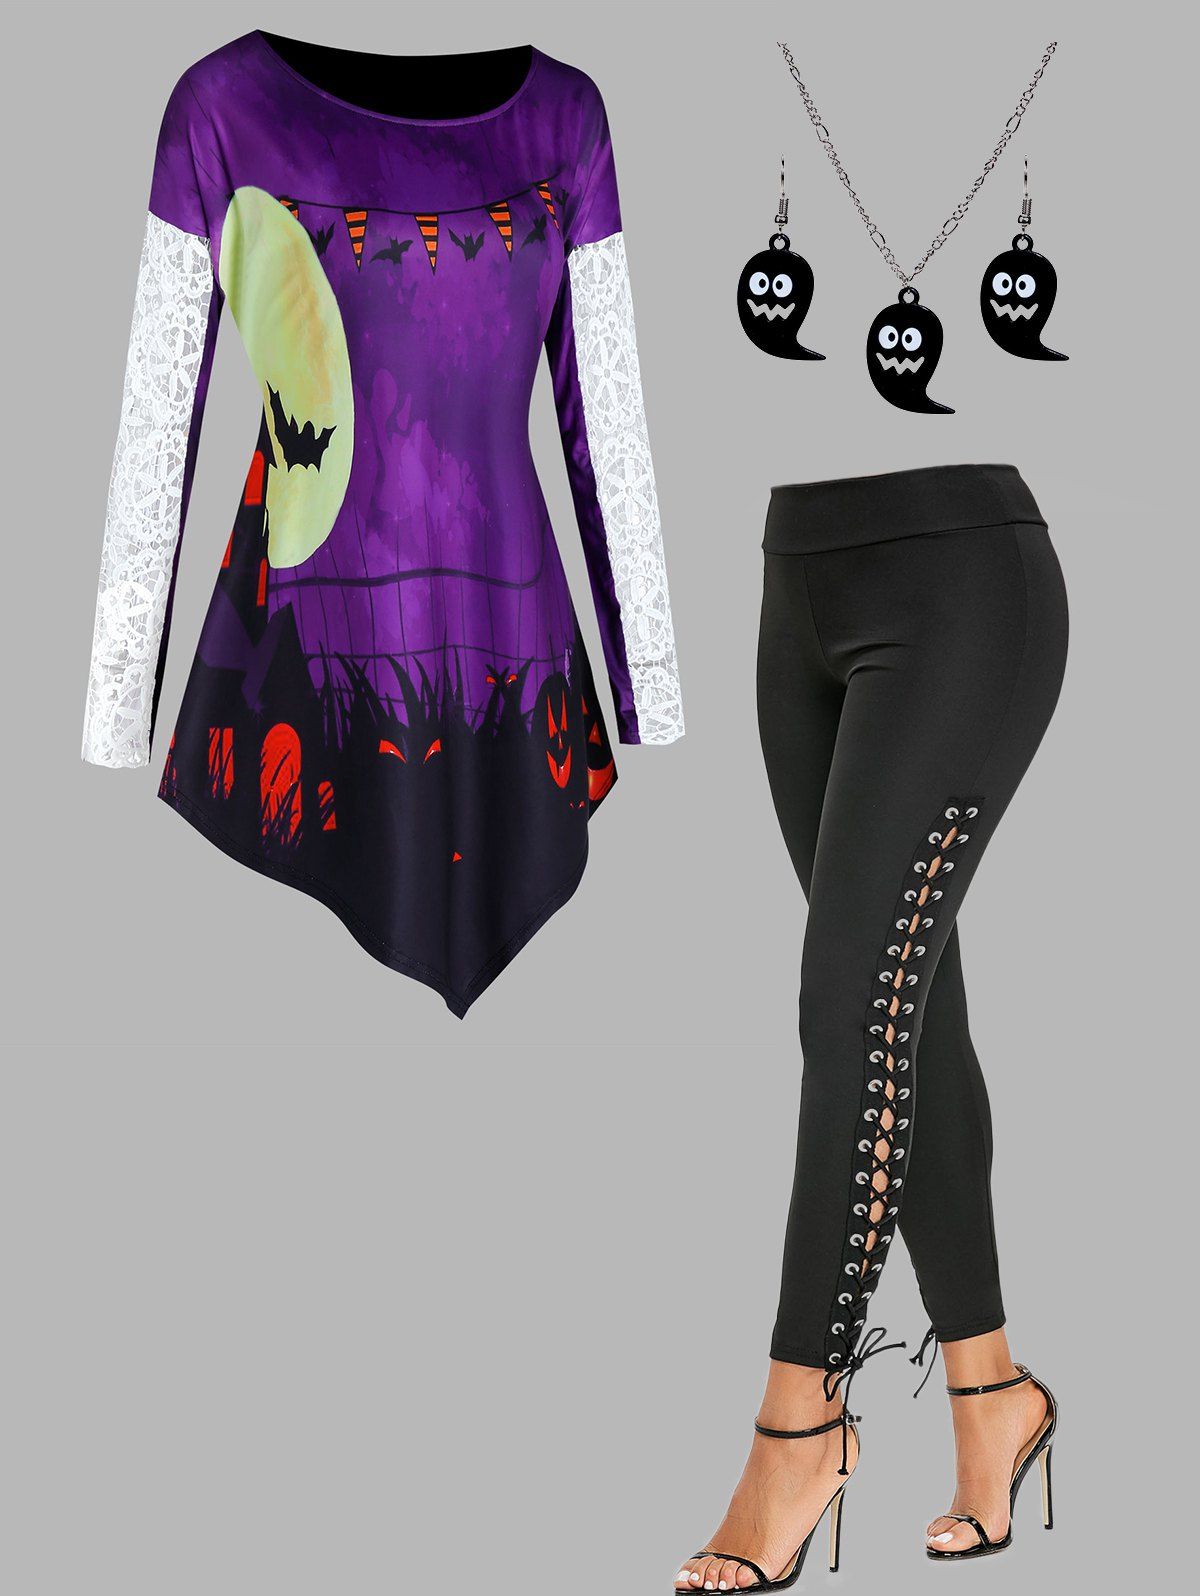 Halloween Pumpkin Bat Pattern Lace Panel Asymmetric T Shirt Lace Up Pants And Cartoon Ghost Necklace Earrings Outfit - multicolor S